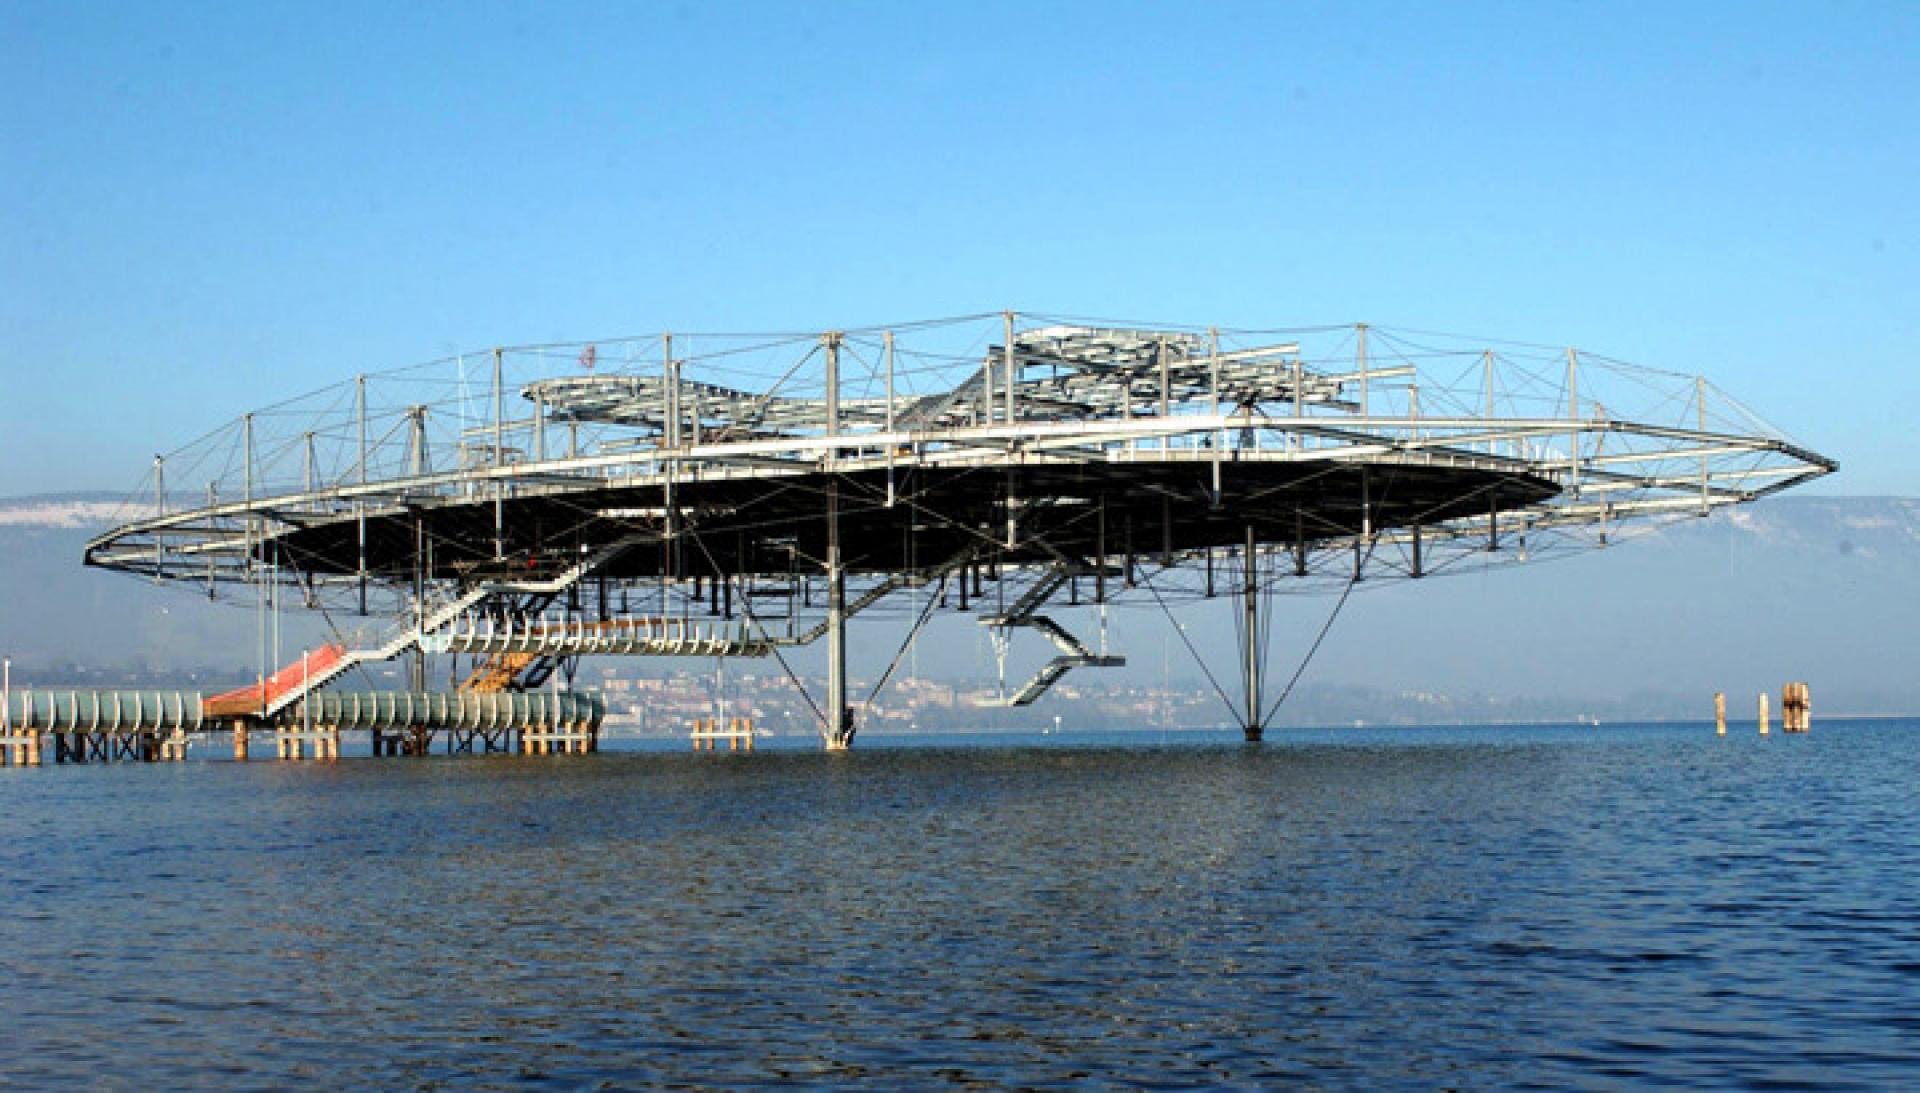 The lightweight tensegrity structure of the Blur building was built for the Swiss Expo 2002 on Lake Neuchatel.